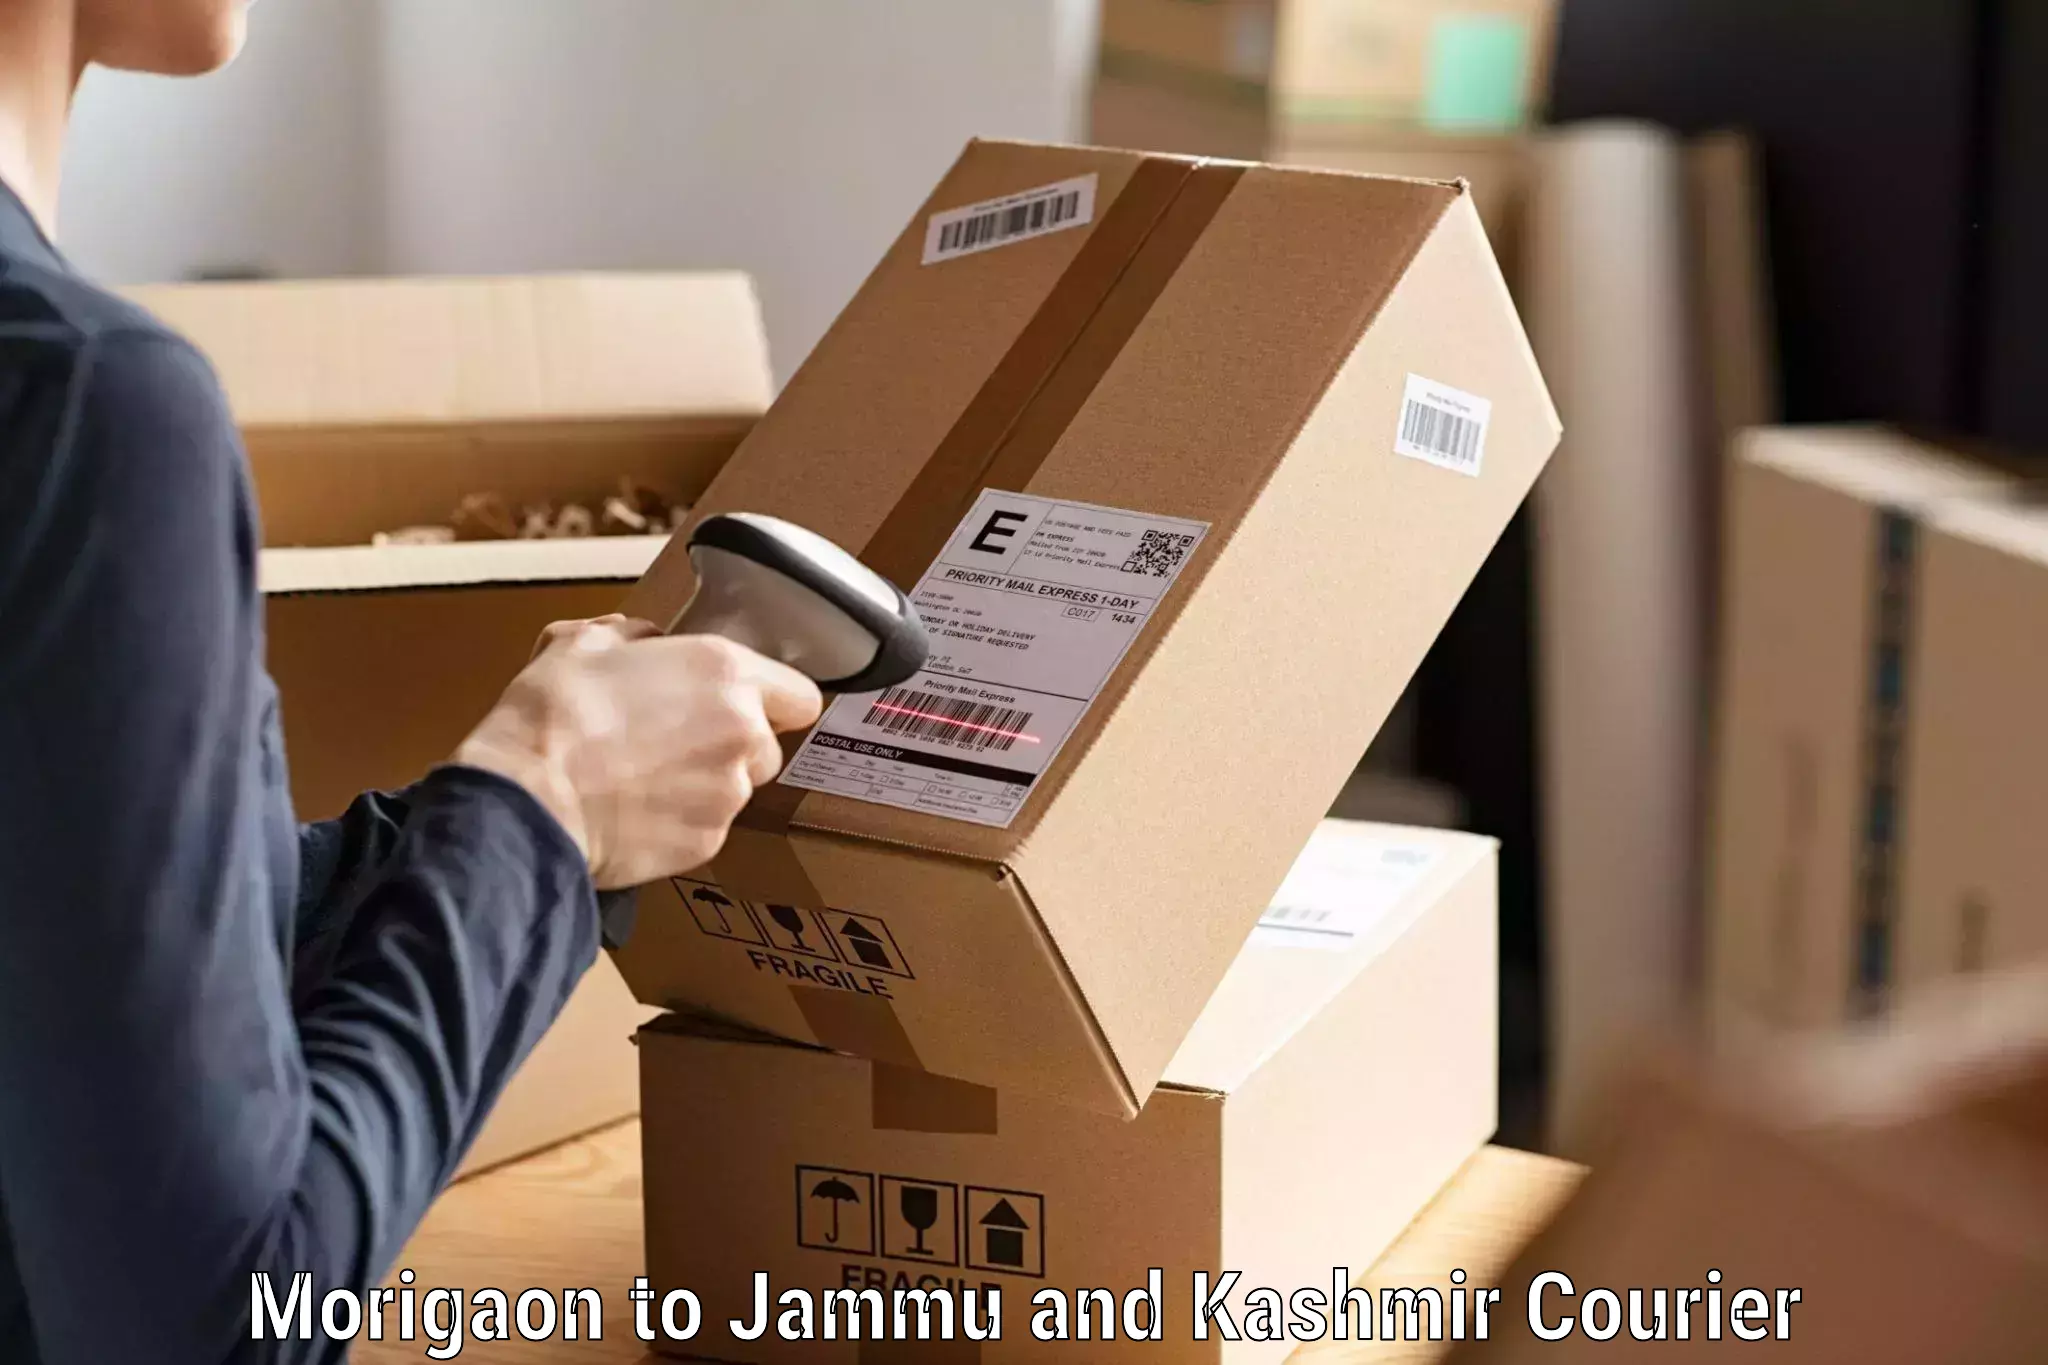 Reliable courier services in Morigaon to Budgam